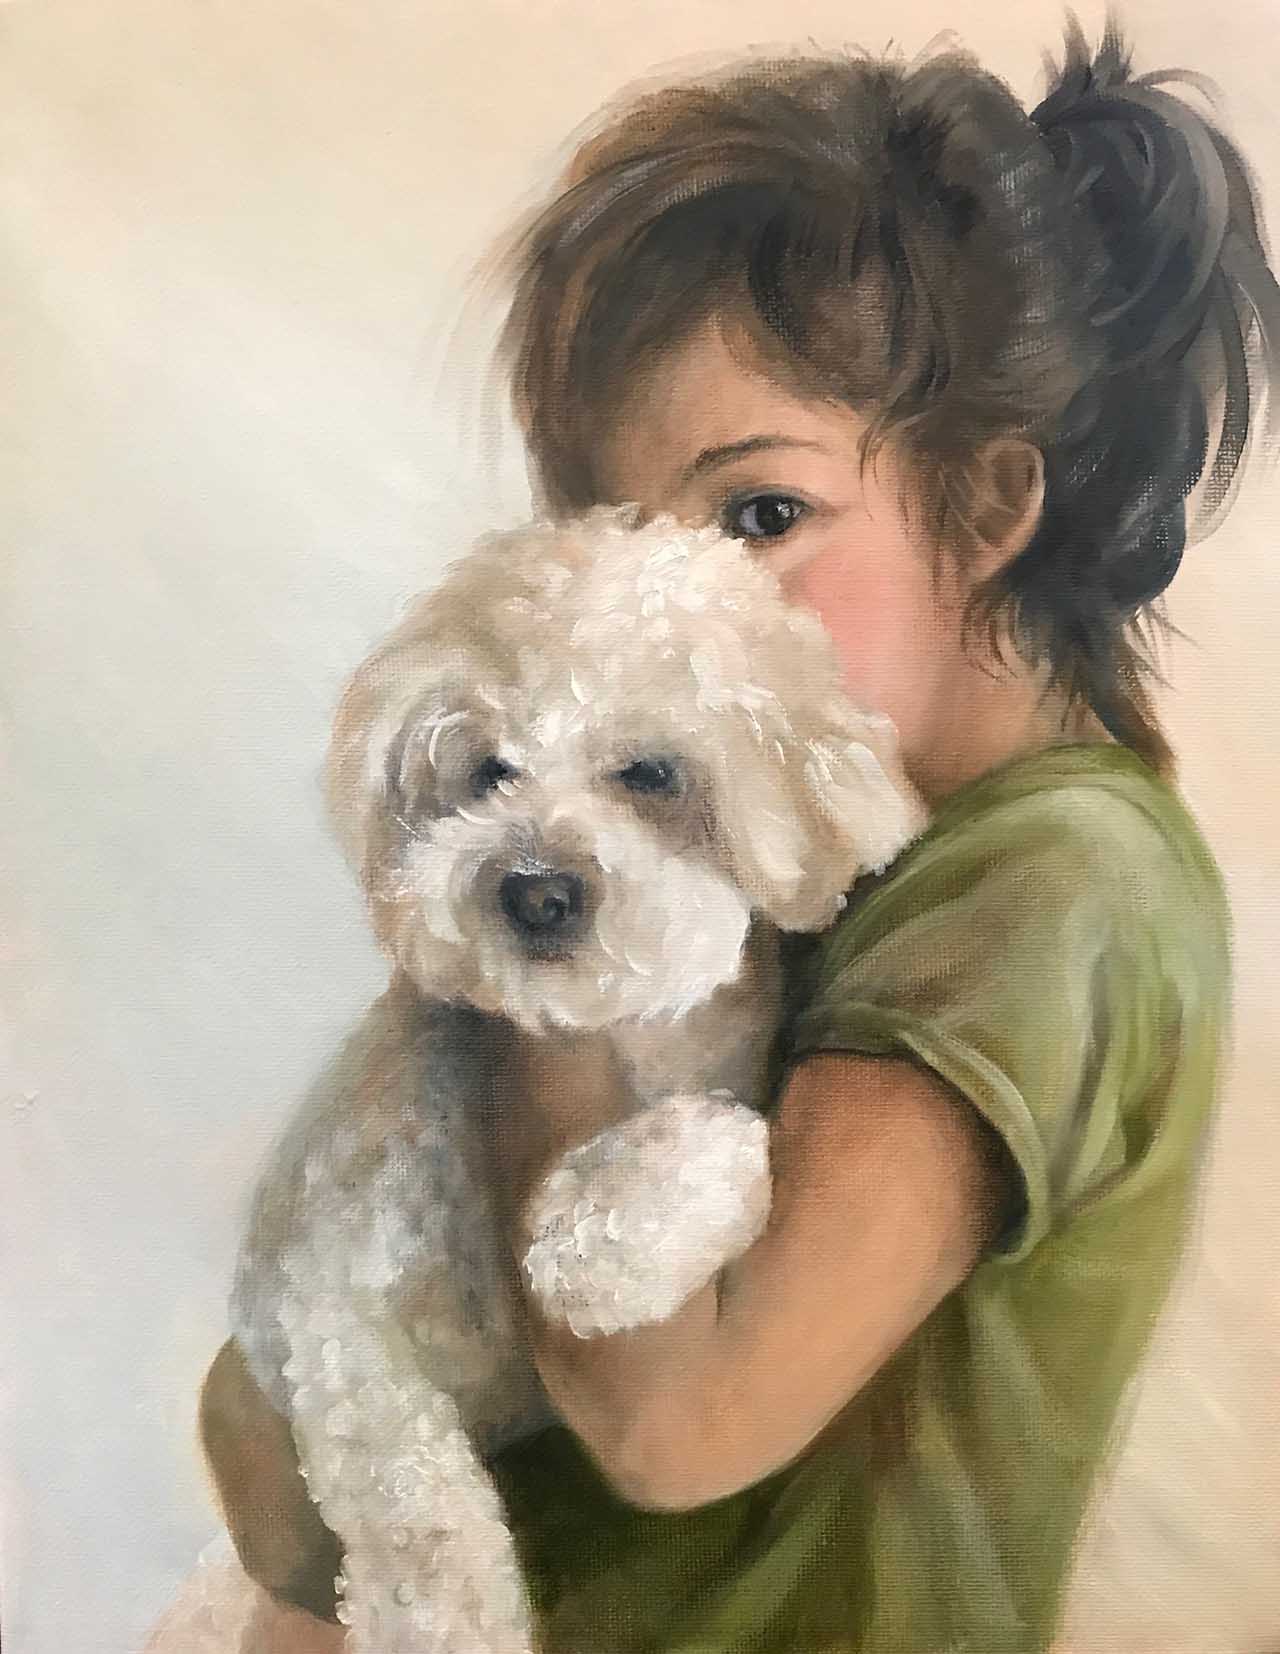 Oil painting of a young girl holding a white dog.. Painted by Carol Williamson.